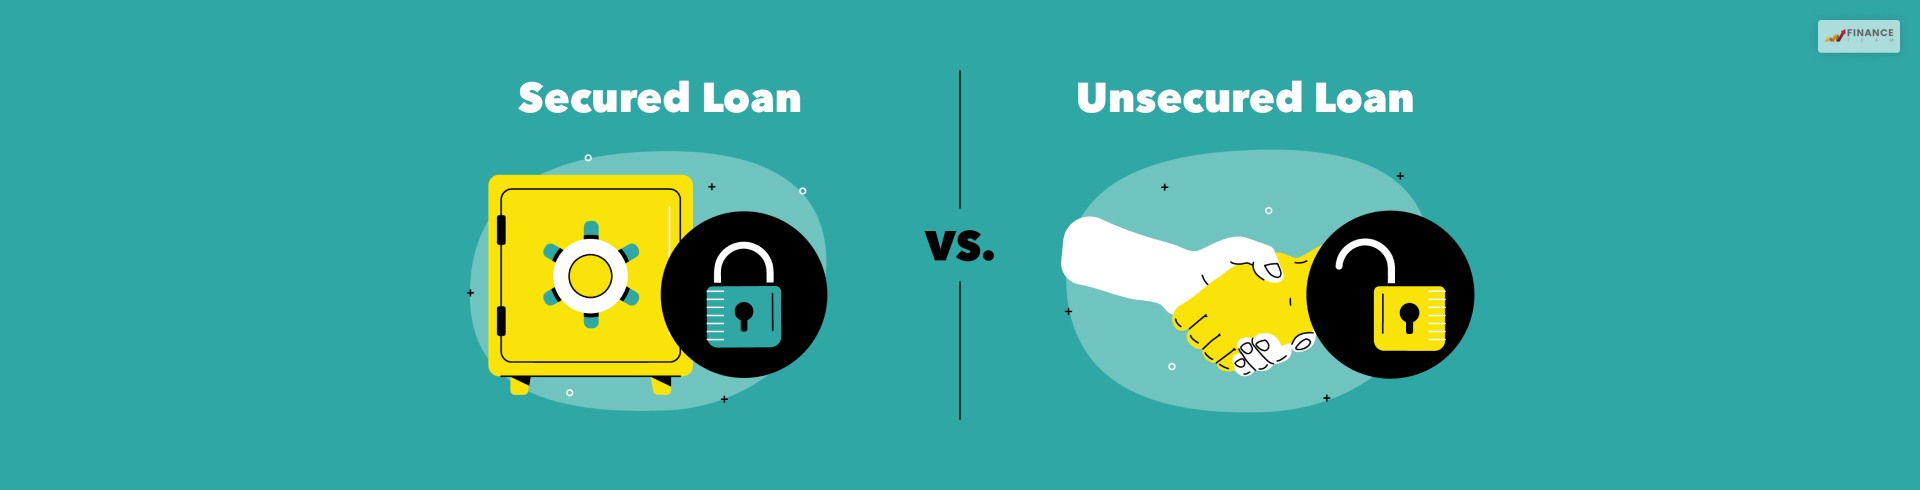 which describes the difference between secured and unsecured credit?